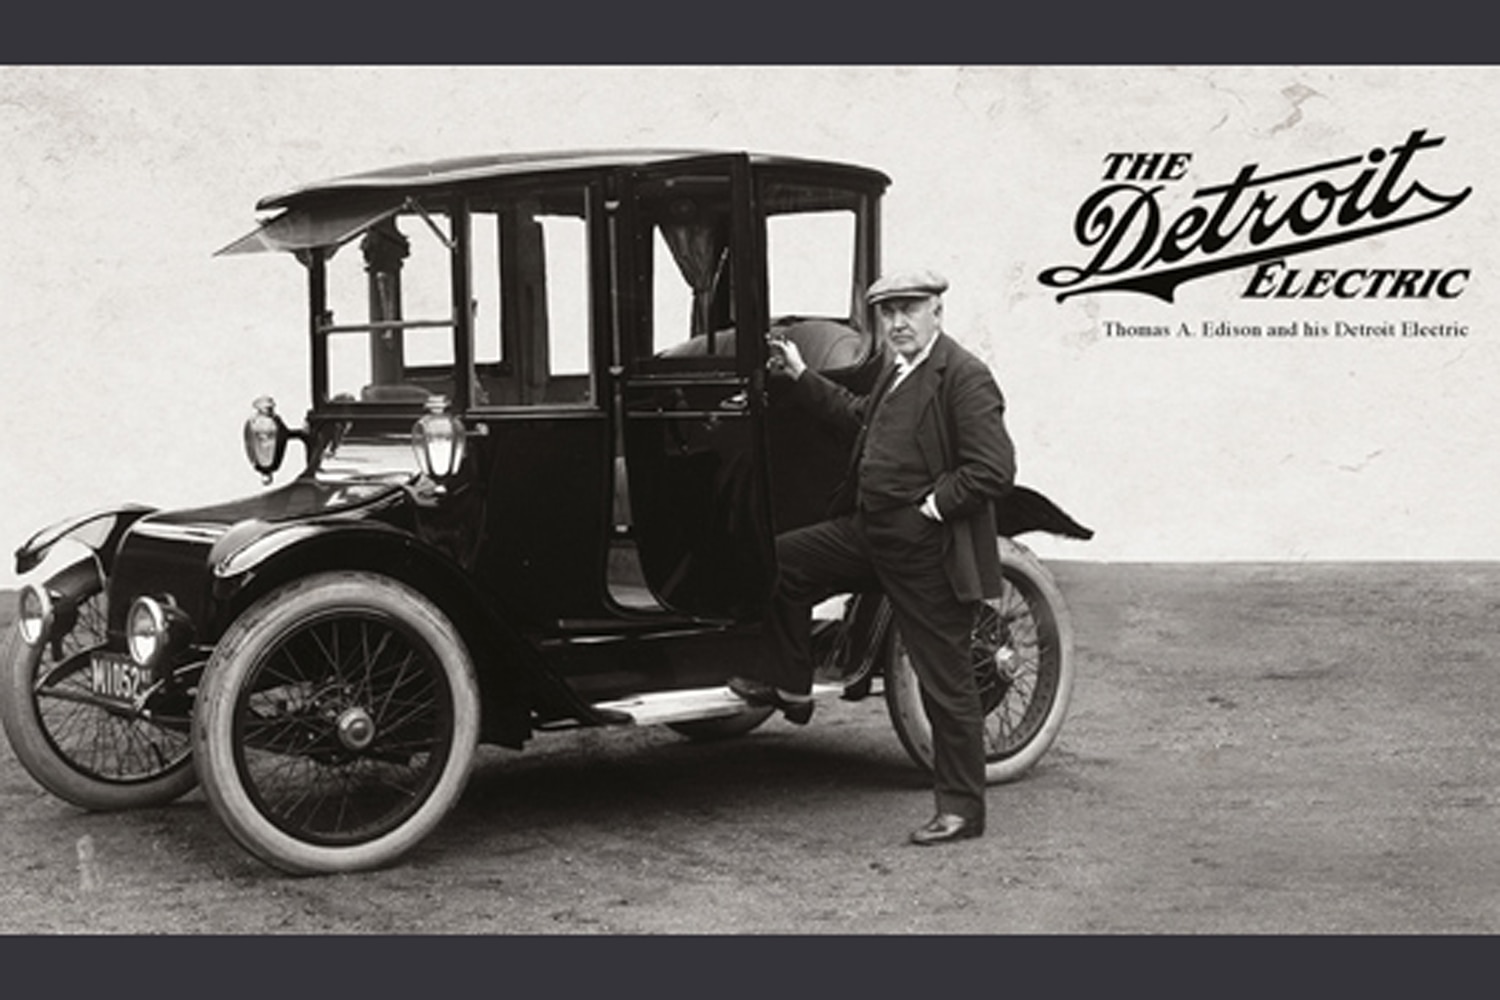 A black and white picture of Thomas Edison and his Detroit Electric car